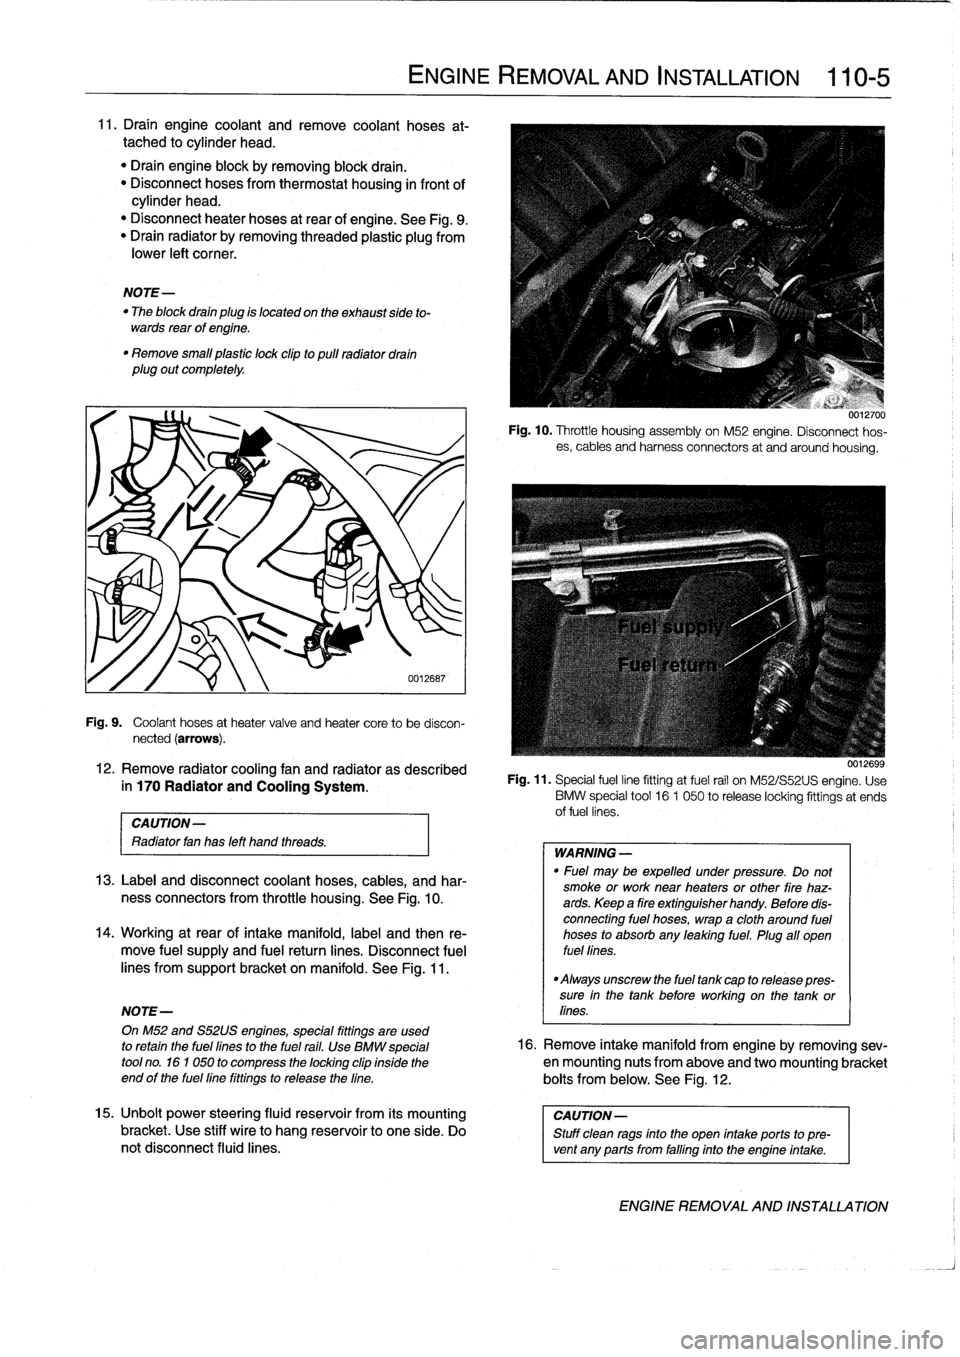 BMW 323i 1995 E36 Workshop Manual 
11
.
Draín
engine
coolant
and
Rmove
coolant
hoses
at-
tached
to
cylinder
head
.

"
Drain
engine
block
byremoving
block
drain
.
"
Disconnect
hoses
from
thermostat
housing
in
front
of
cylinder
head
.
